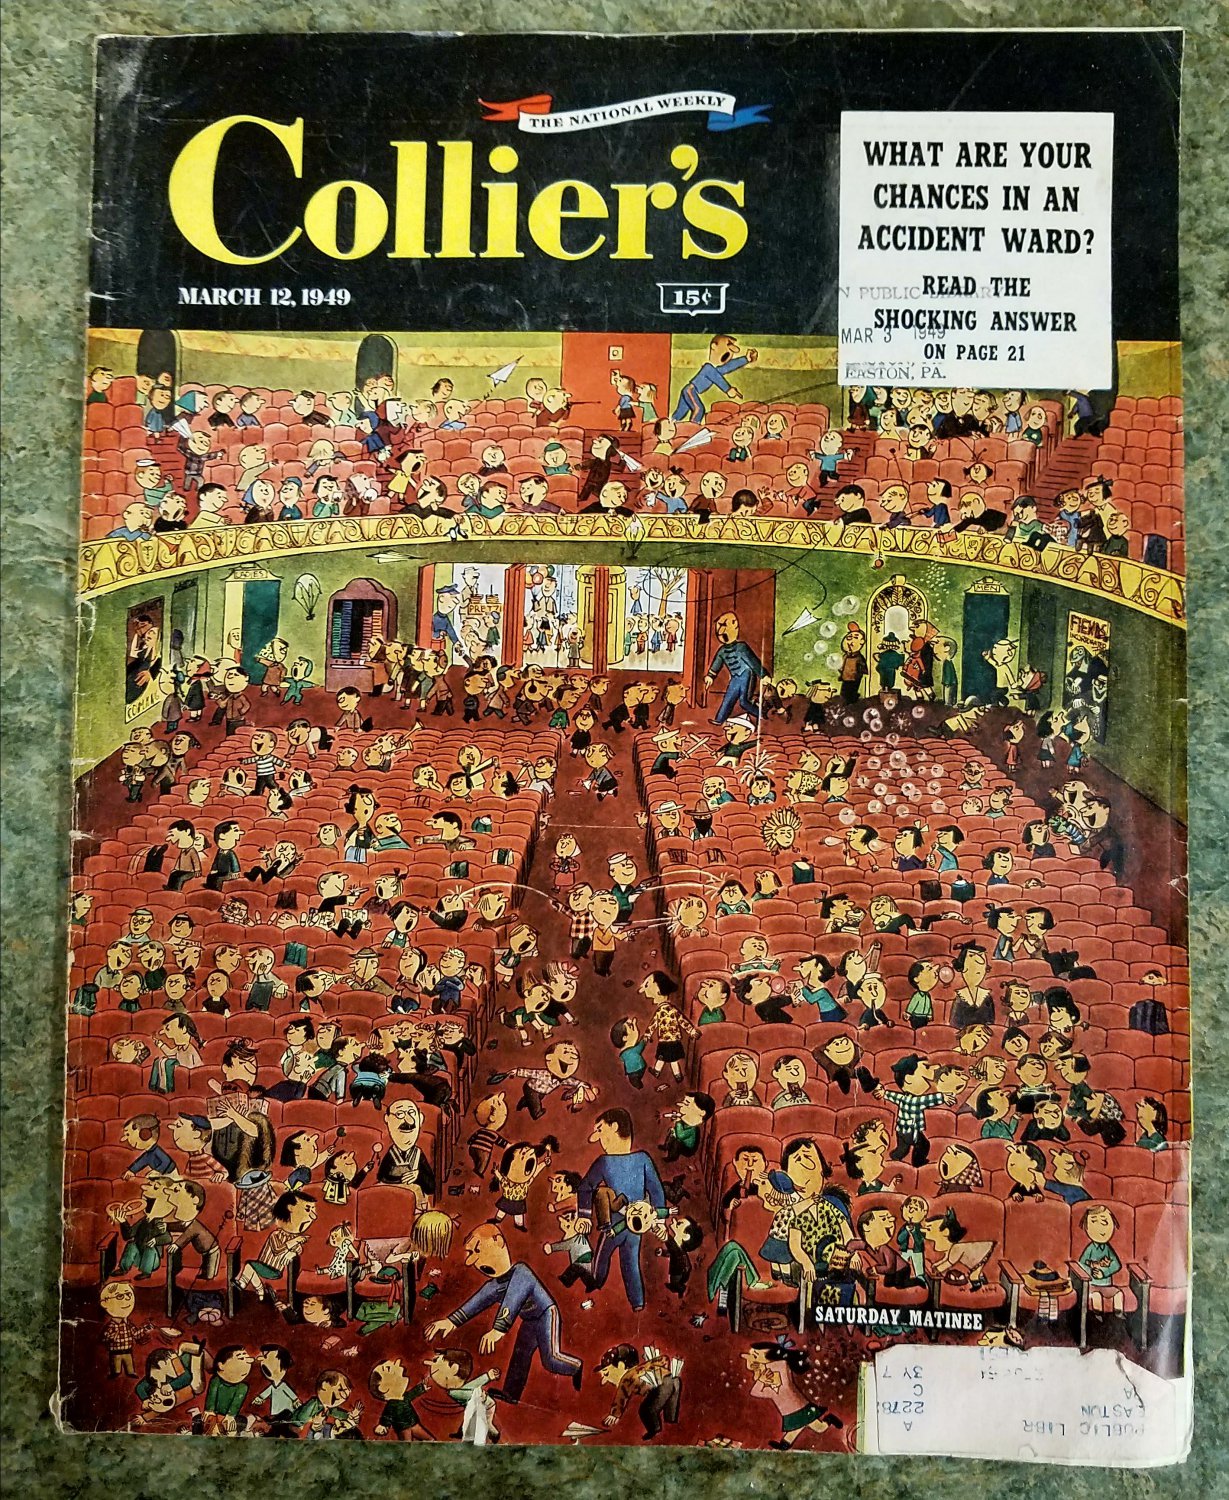 COLLIER’S MAGAZINE - ONE ISSUE - MARCH 12, 1949